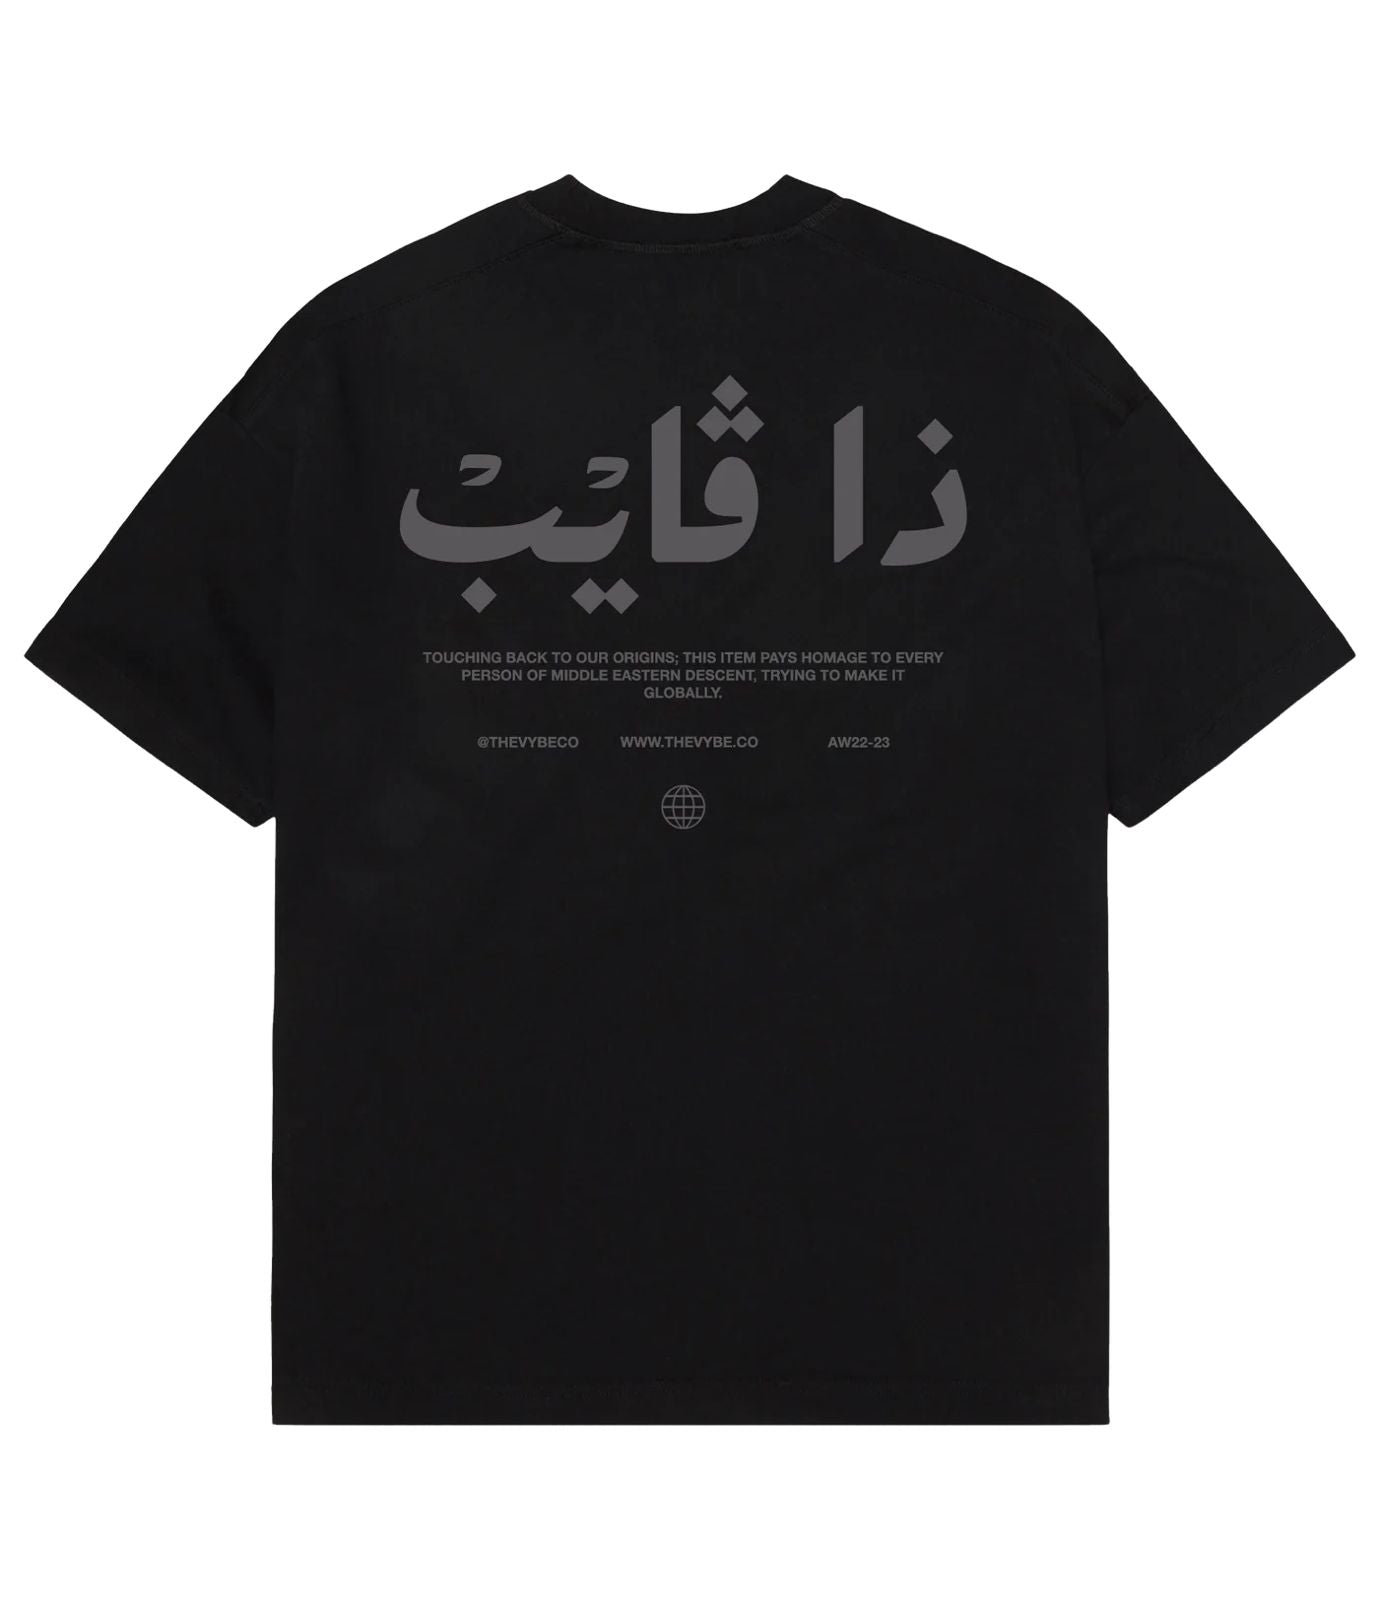 OBSIDIAN "BLACK OUT" HERITAGE TEE